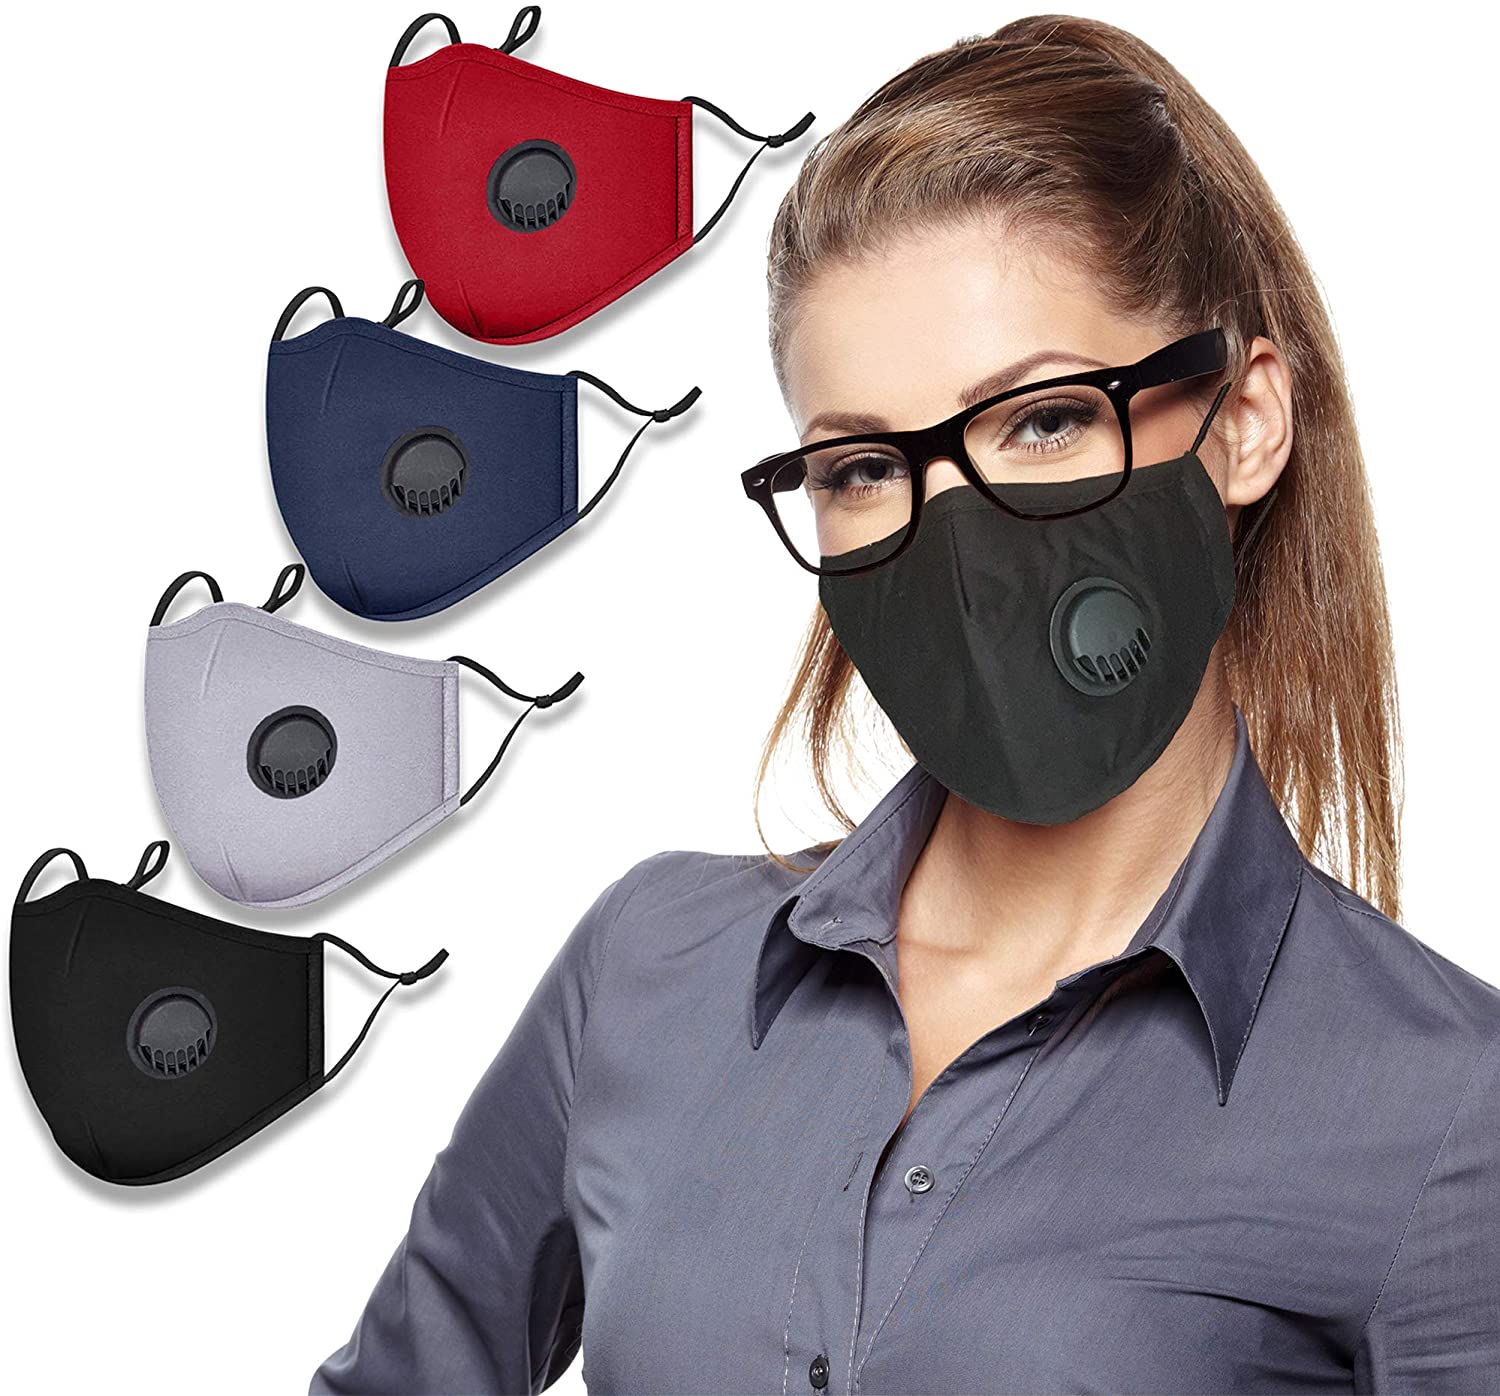 GreenHug Face Covering with Breathing Valve and PM2.5 Activated Carbon Filter, washable and reusable. Anti-dust and anti-pollution, for sport and outdoor activity. Adjustable straps